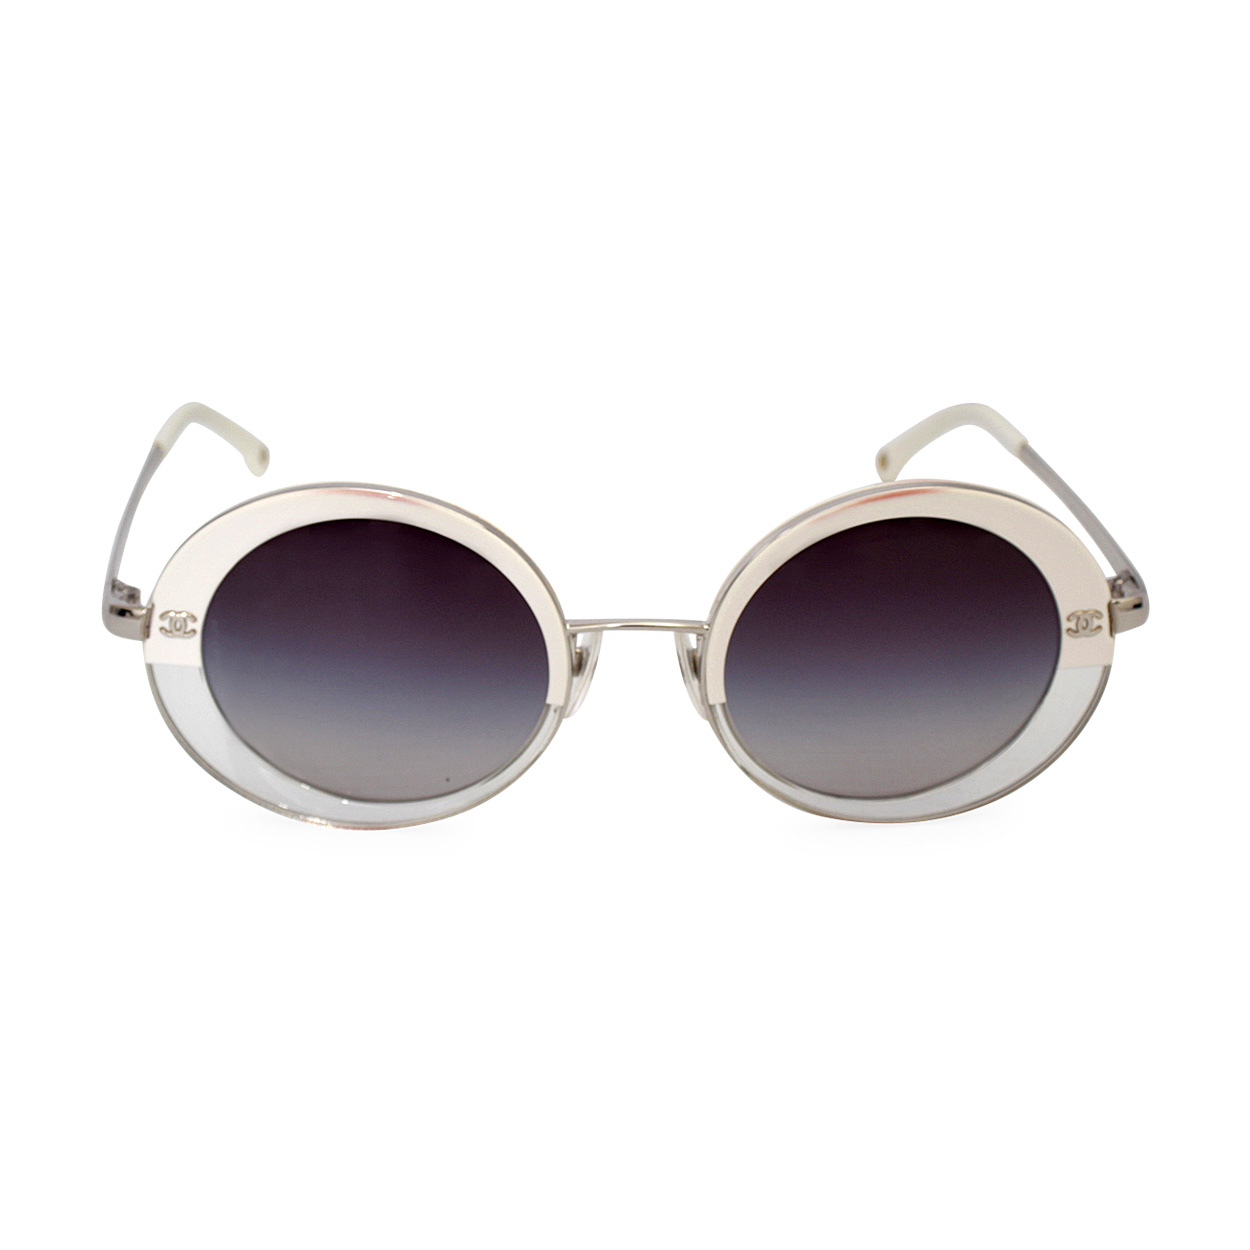 CHANEL Round Sunglasses 4182 White | Luxity